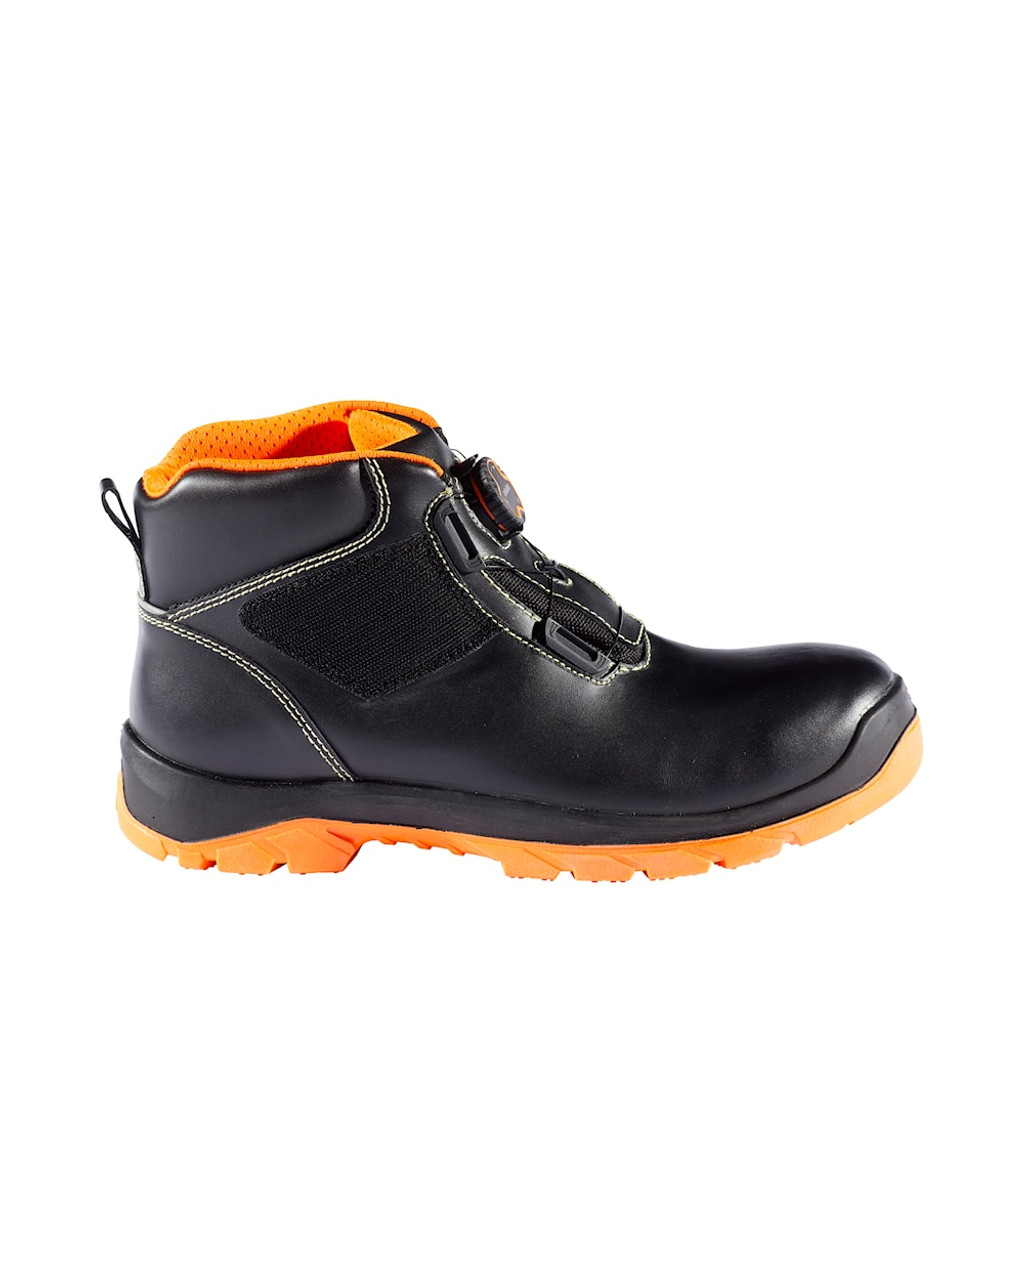 Safety Boots 2458 from BLAKLADER for Welders that have WELDING Freelock System  available in Australia and New Zealand